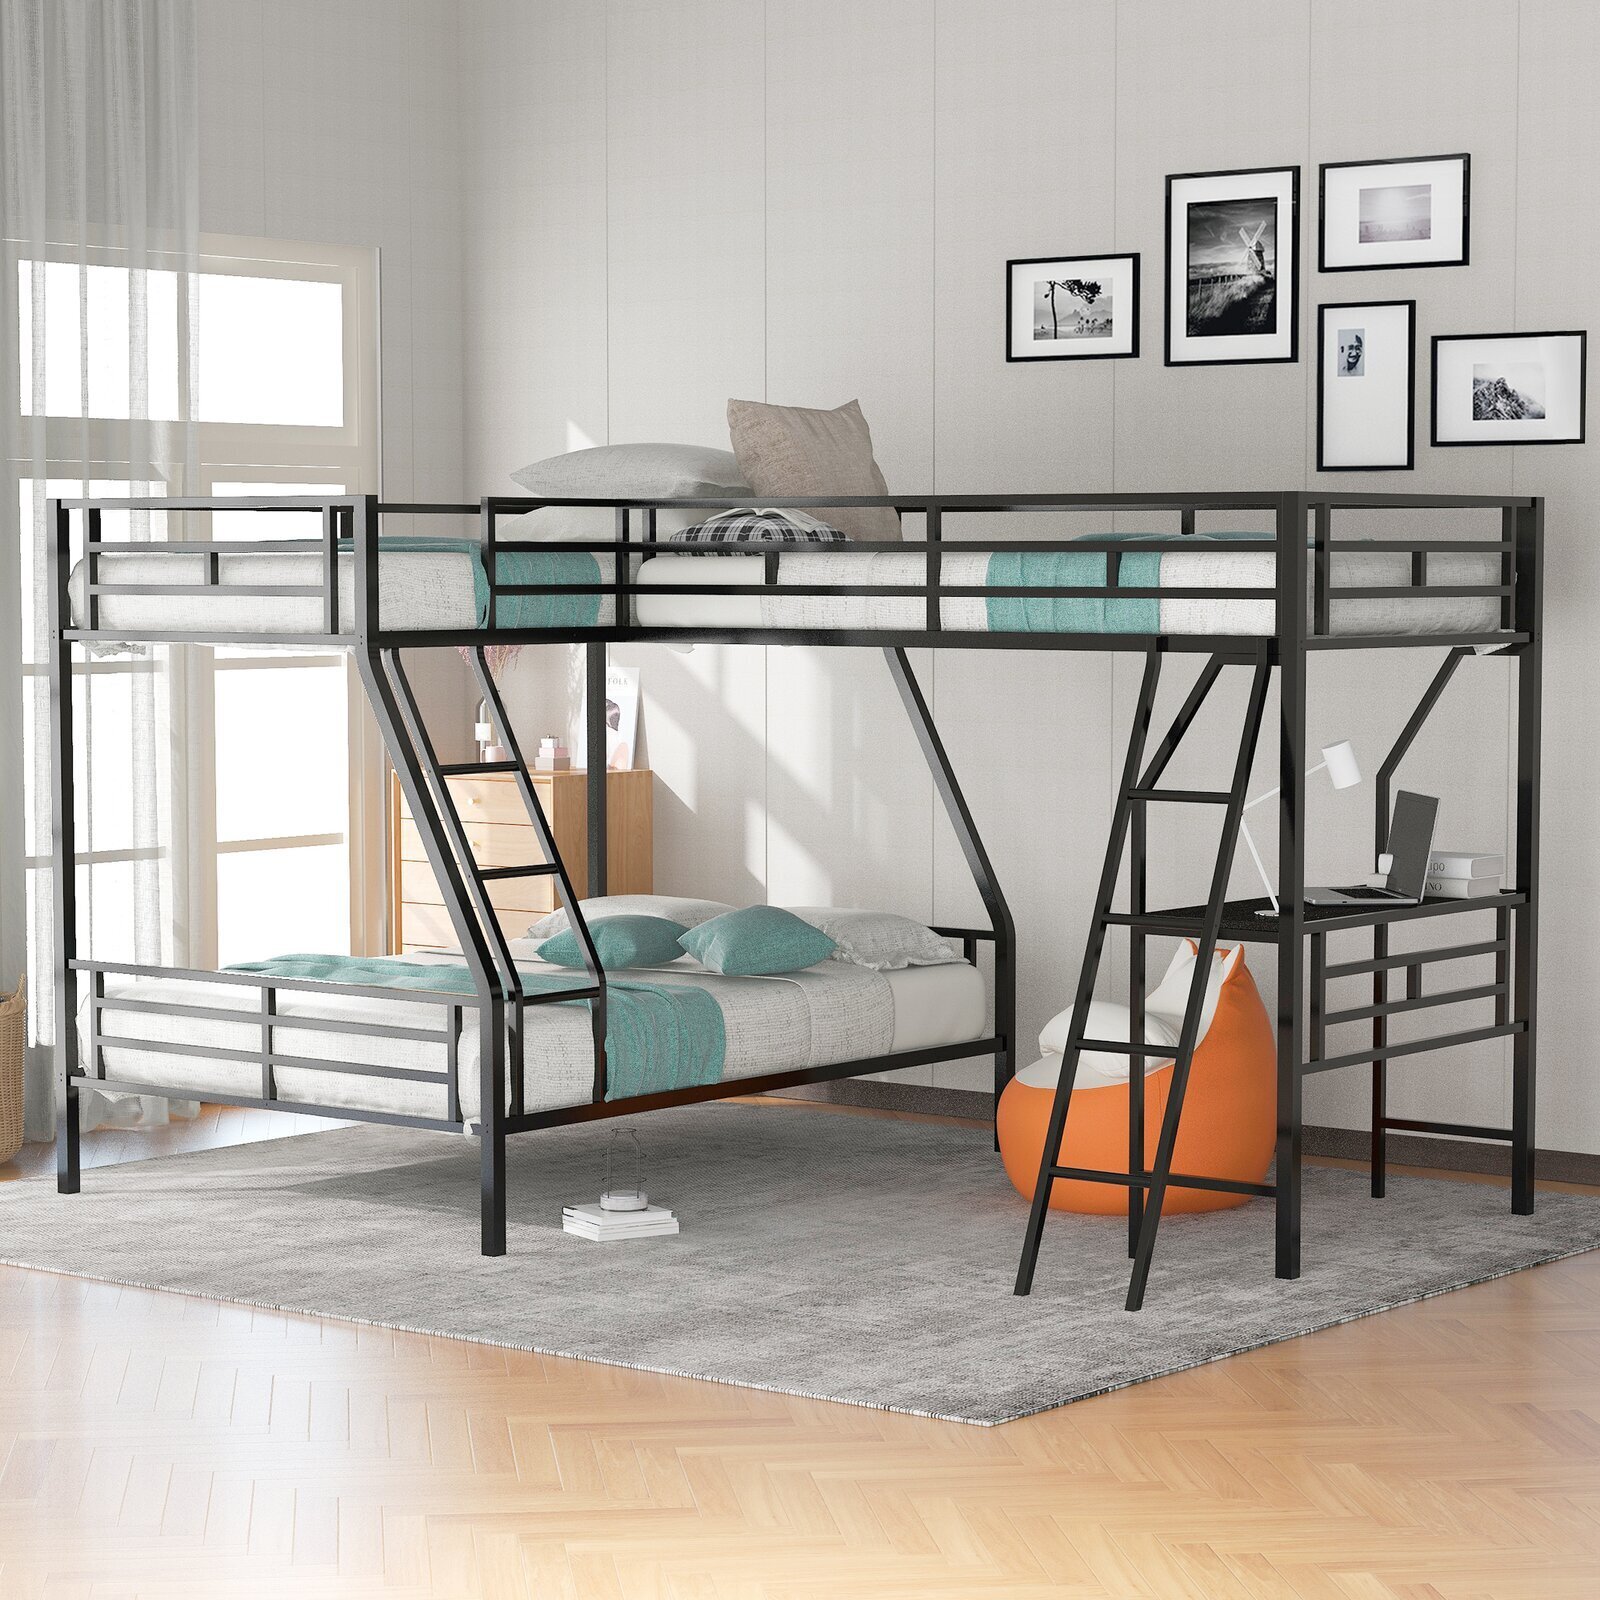 Stylish Triple Bed with Study Table Below